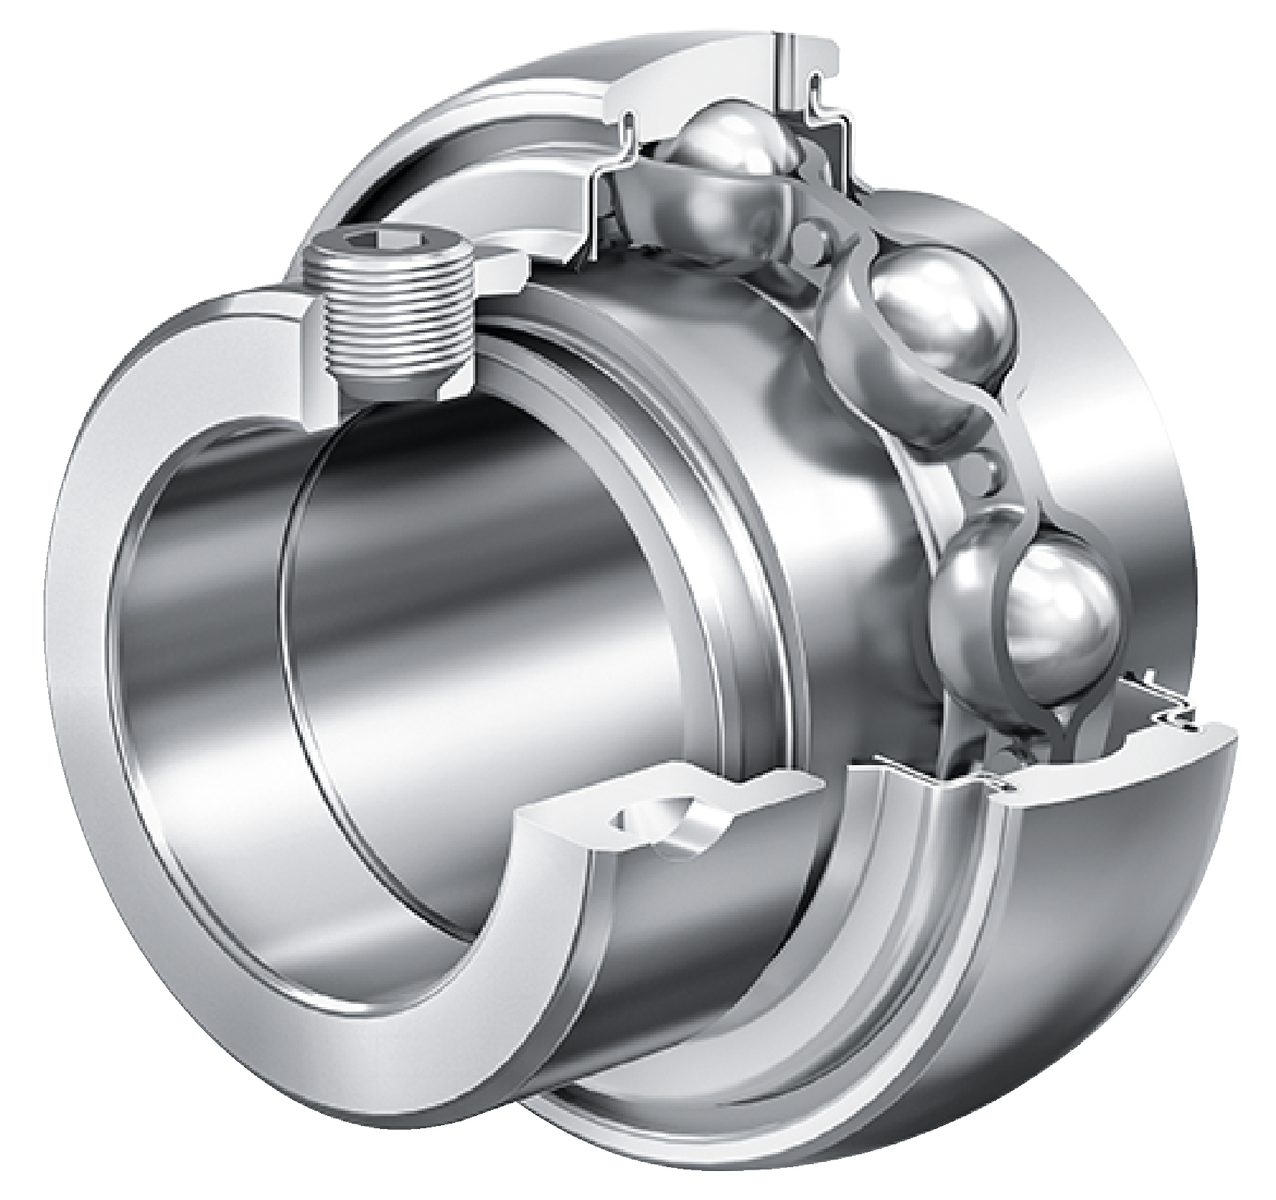 Radial Insert Ball Bearing GE..-XL-KRR-B-FA164, Spherical Outer Ring, Eccentric Locking Collar, R Seals on Both Sides, High Temperature GE30-XL-KRR-B-FA164